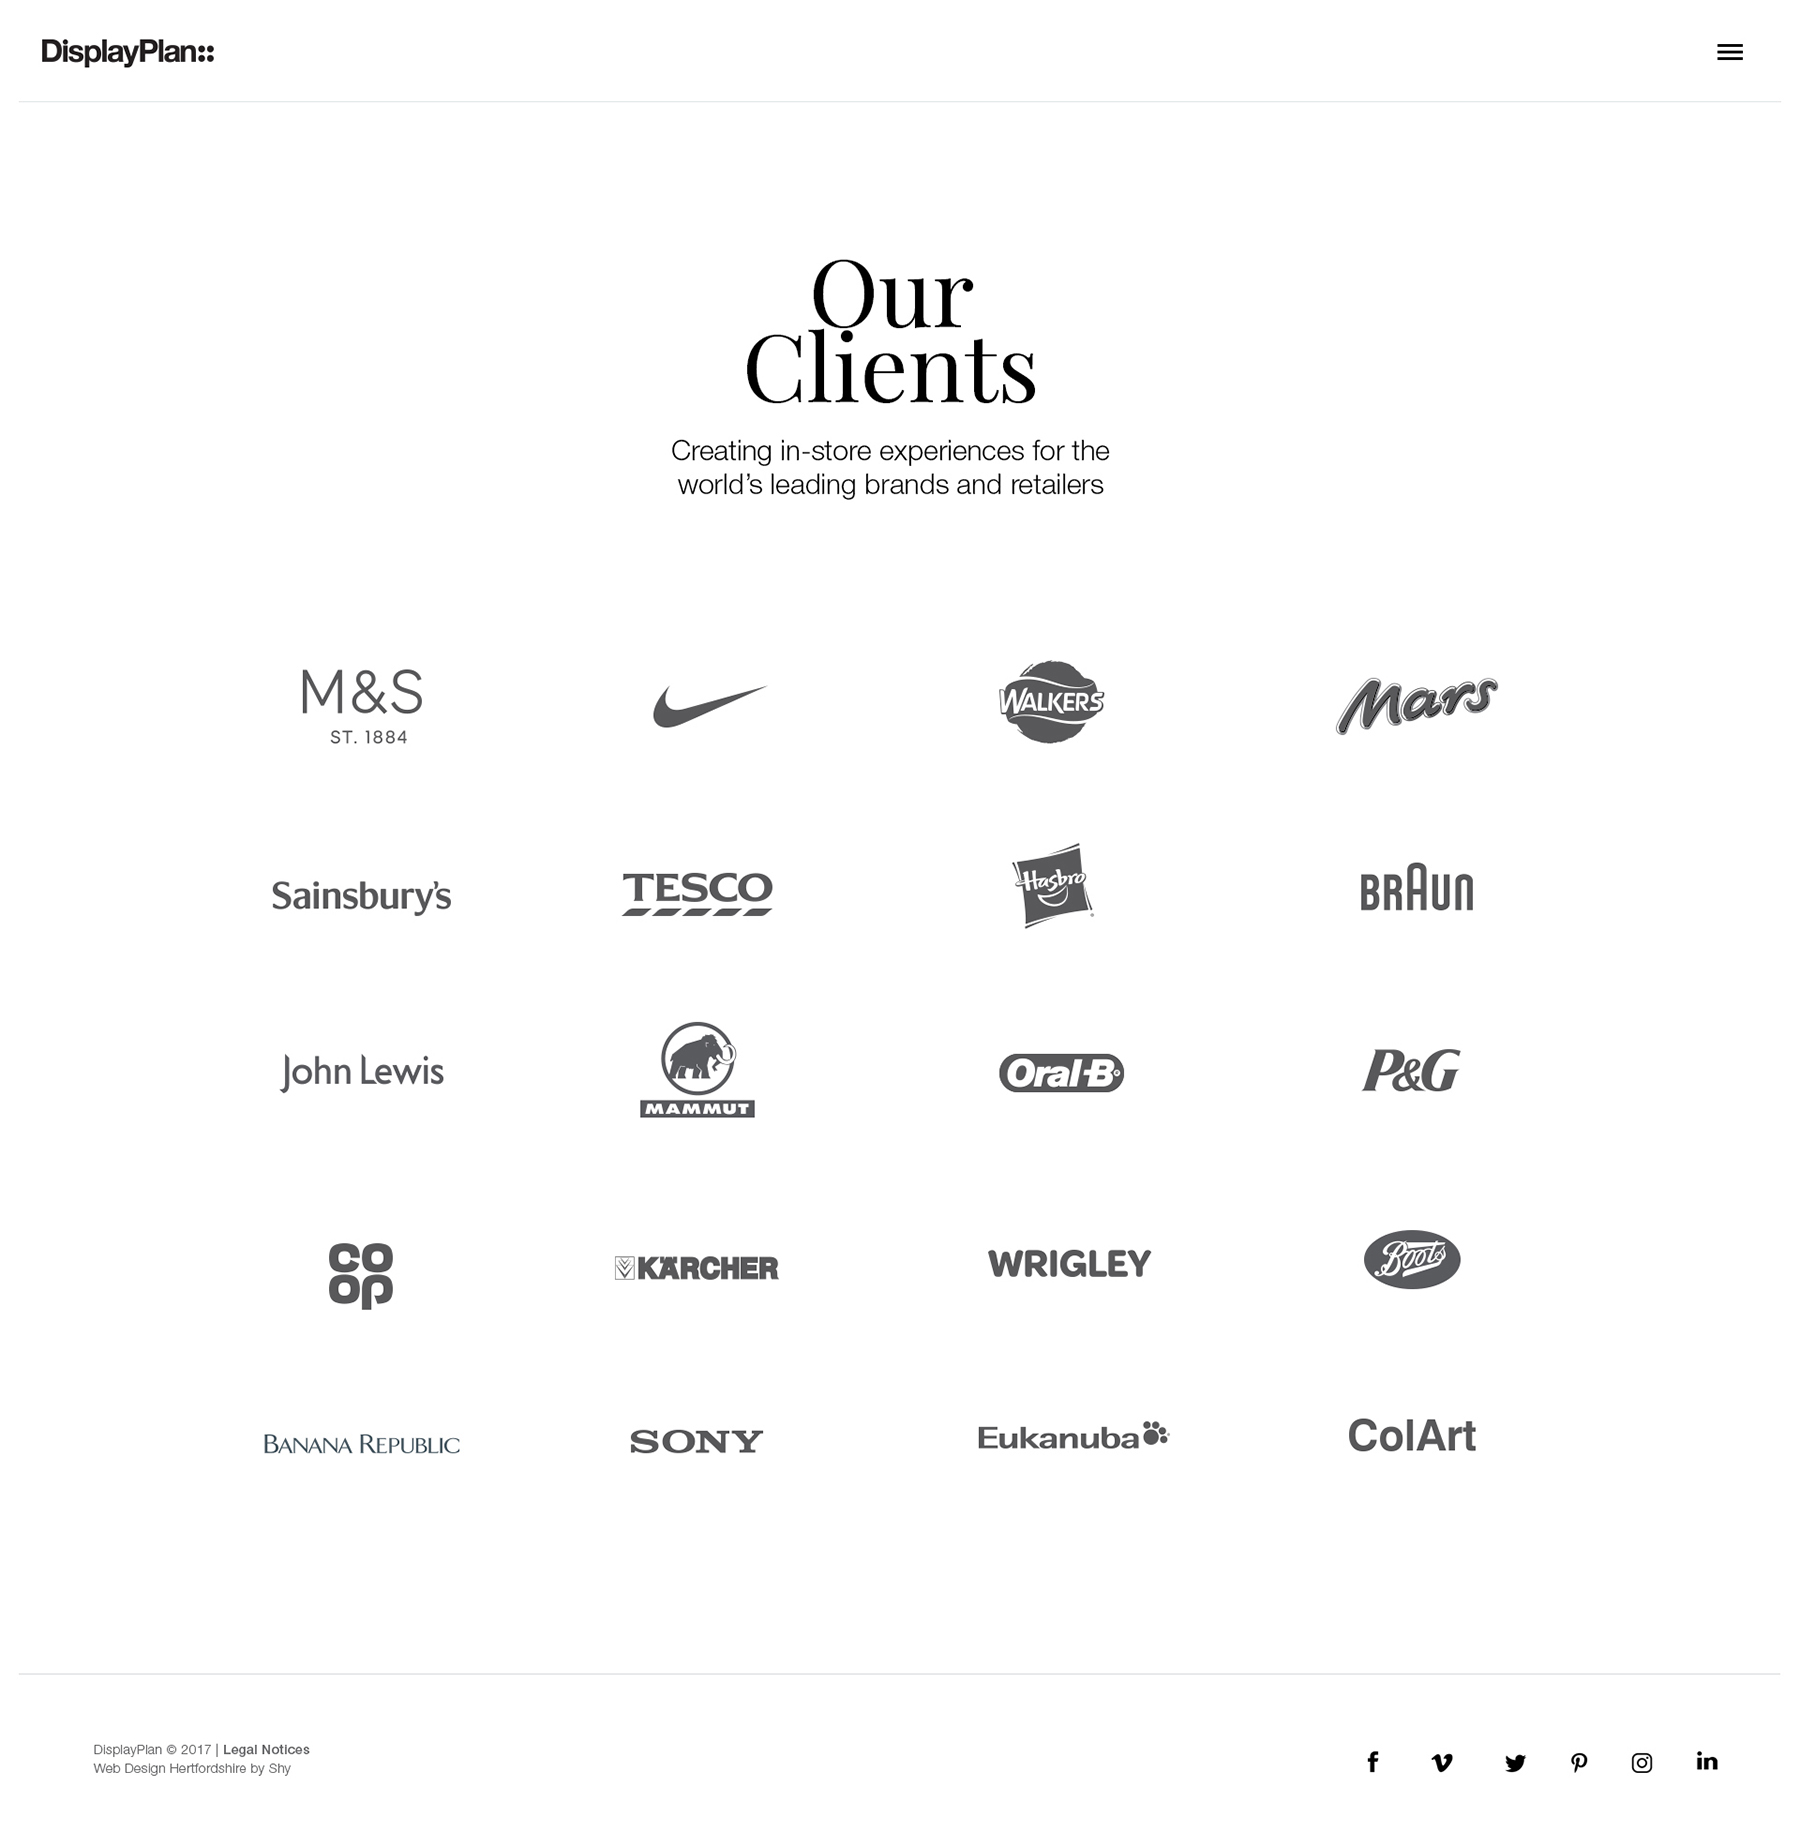 Design of the "Our Clients" page for the Displayplan website.